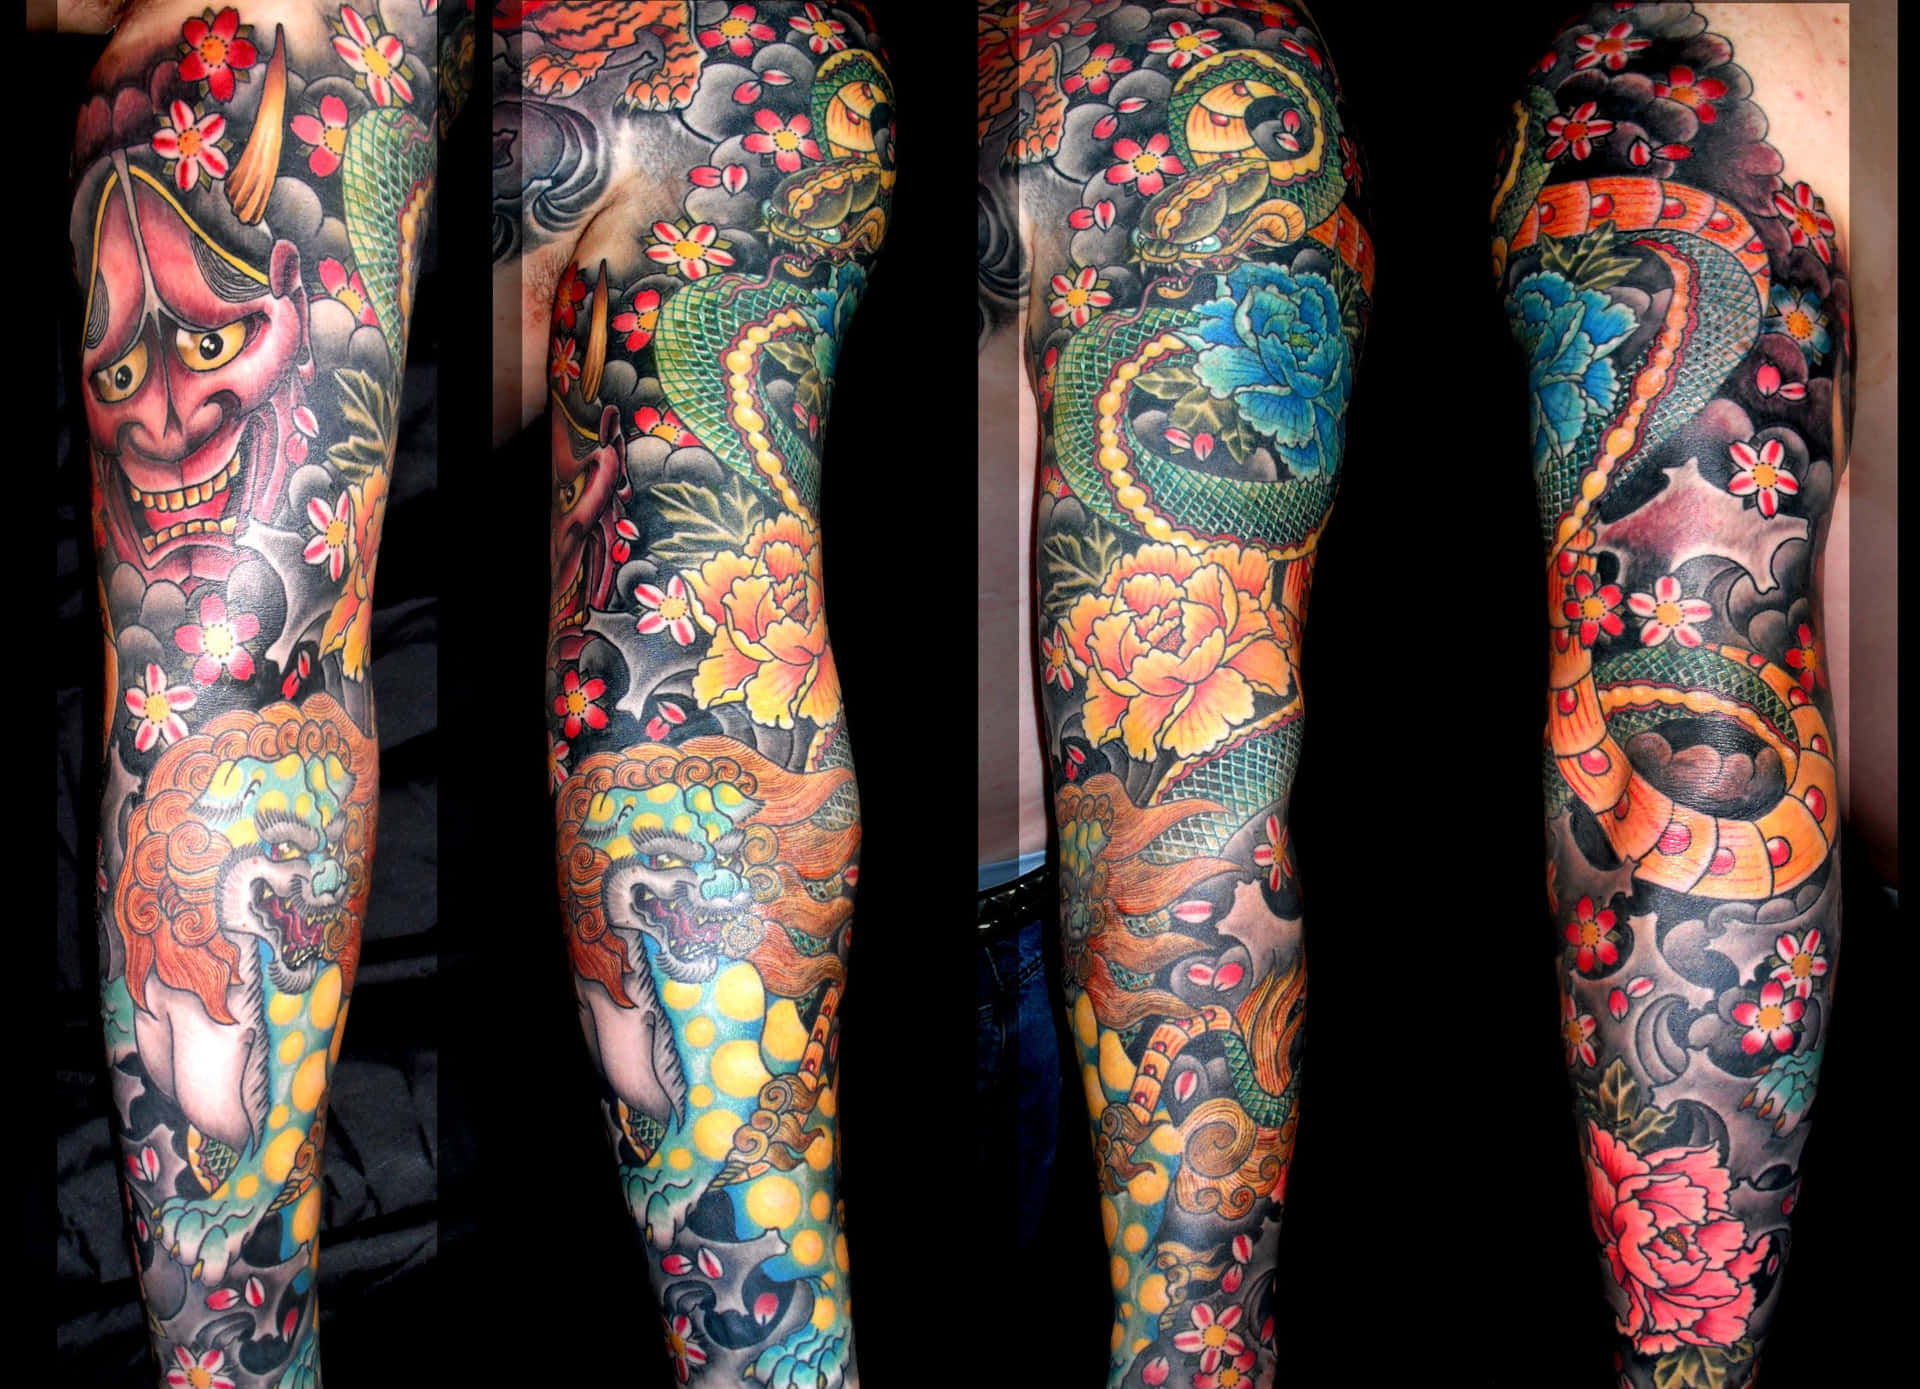 A Man With A Colorful Tattoo On His Arm